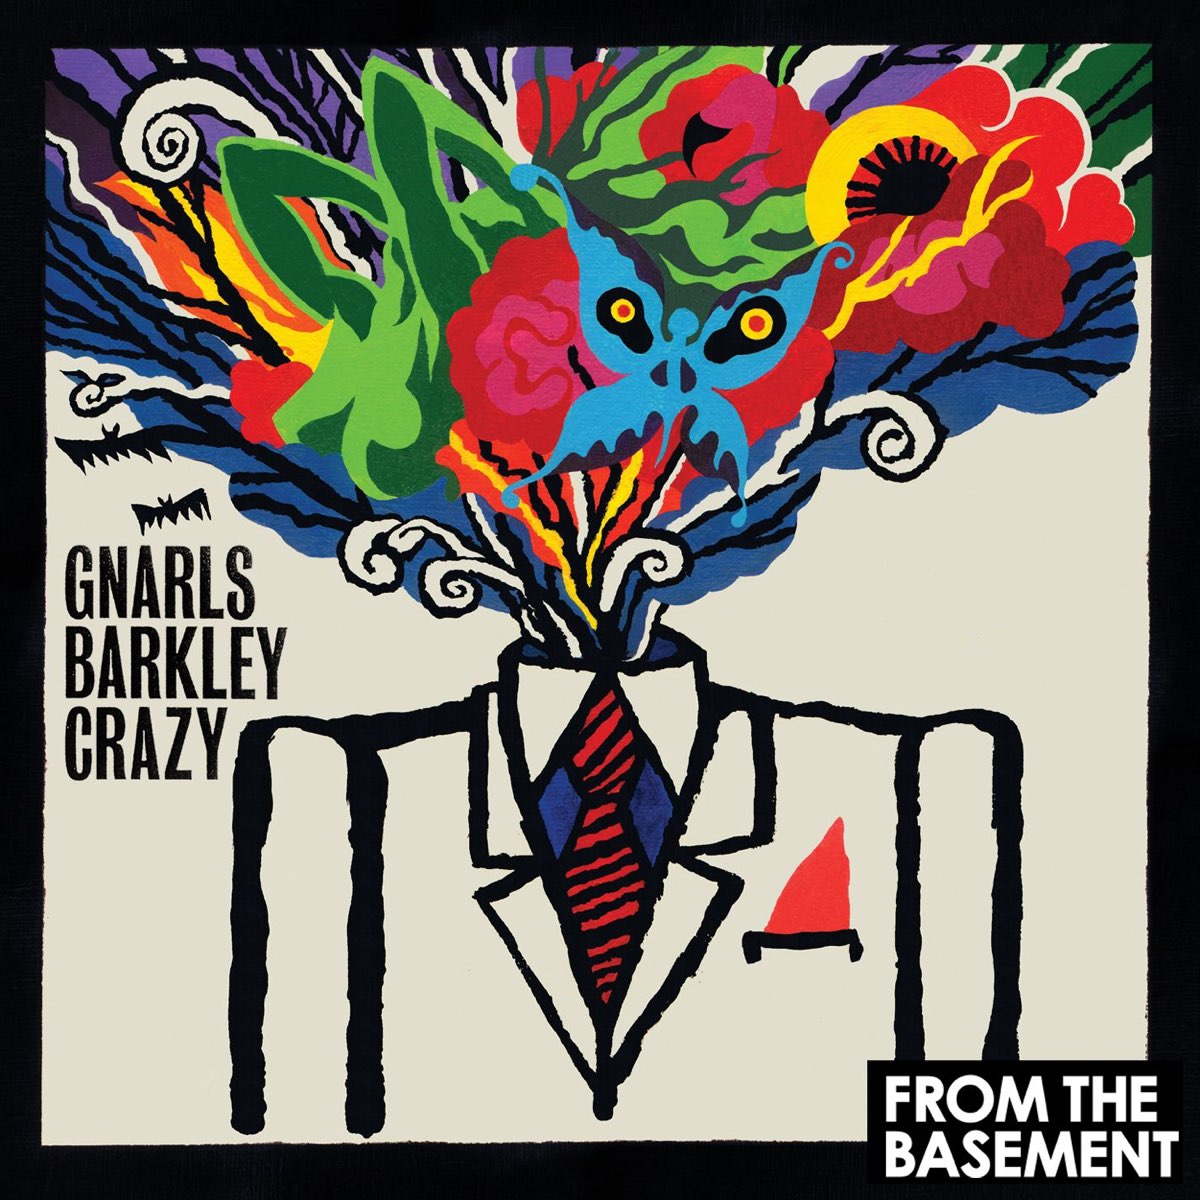 Crazy (Live From the Basement) - Single by Gnarls Barkley on Apple Music